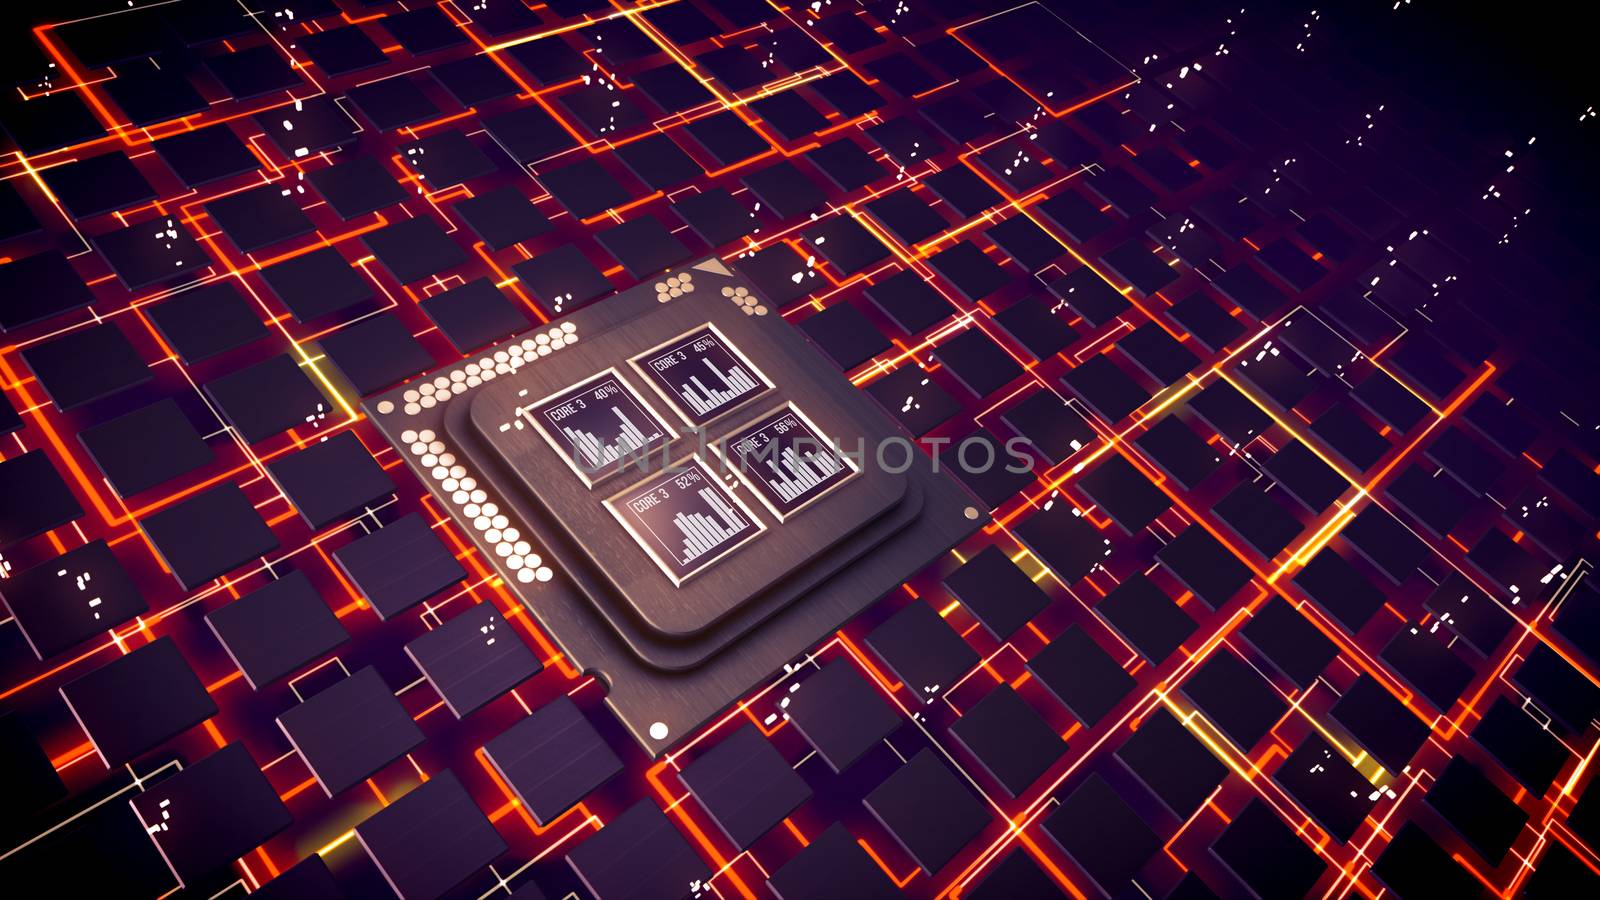 Exciting 3d illustration of CPU squares with bar charts beaming inside. Plexus of rectangular and multilayered communication links sparkling brightly in the black backdrop.